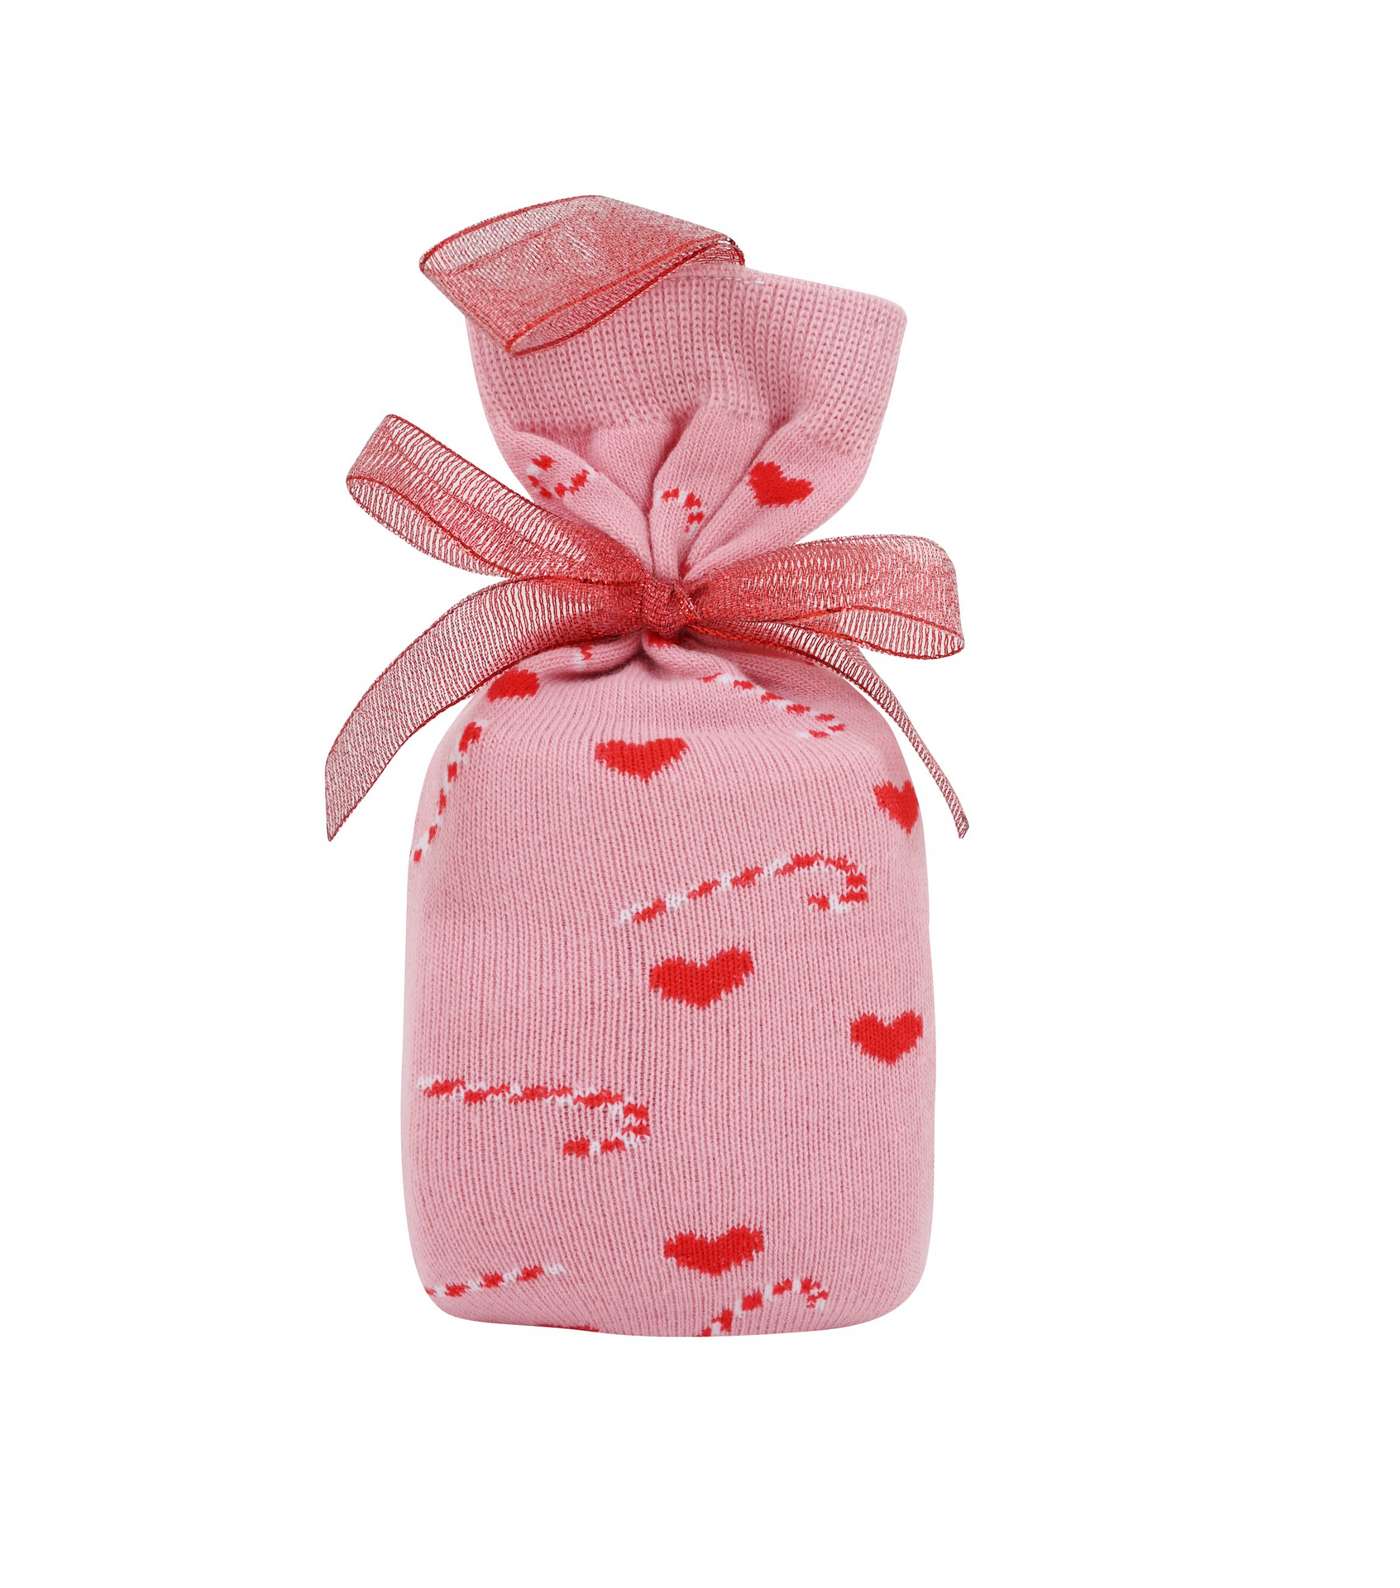 Loungeable Pink Heart Candy Cane Socks in a Sock Bag Image 2